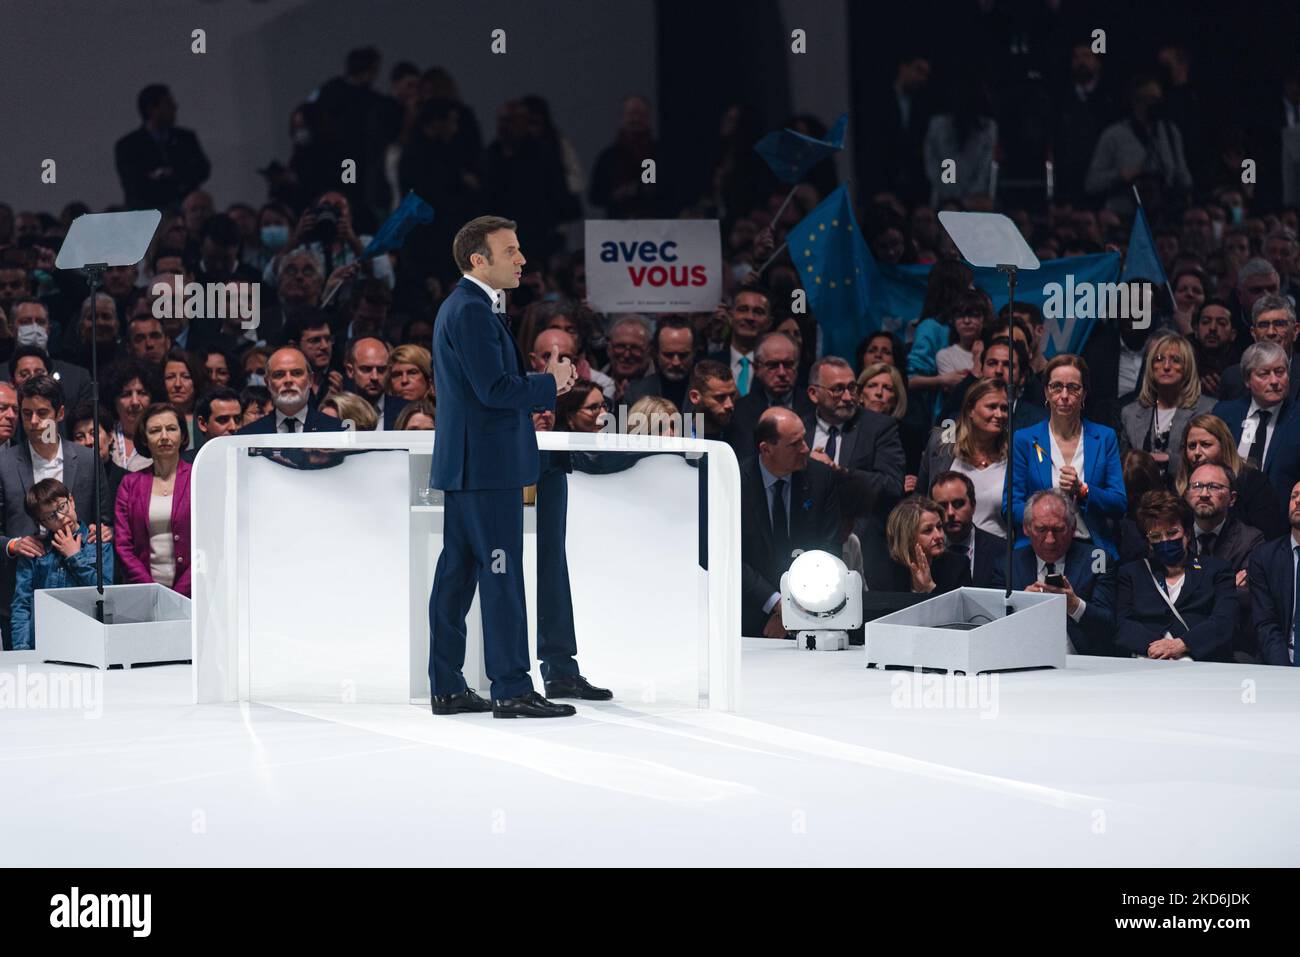 French President and candidate for his own re-election of the liberal party La République en Marche (LREM), Emmanuel Macron, speaks during his first campaign rally held at the U Arena in Paris La Défense in front of several thousand supporters and members of his government, in Nanterre, a suburb of Paris, April 2, 2022. (Photo by Samuel Boivin/NurPhoto) Stock Photo